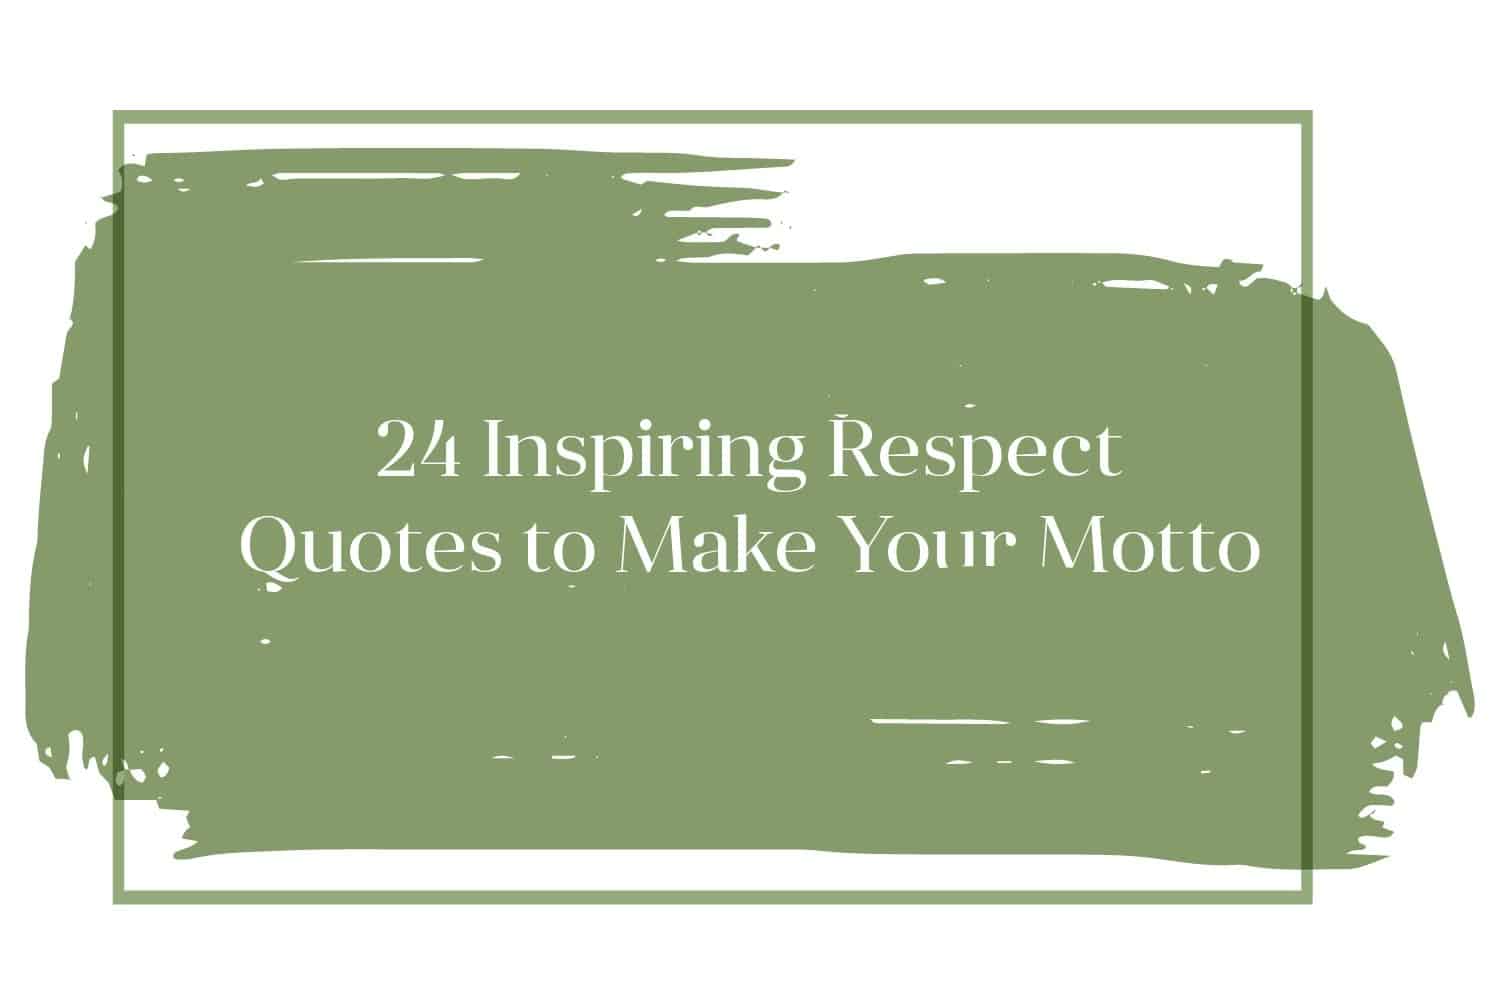 respect relationship quotes